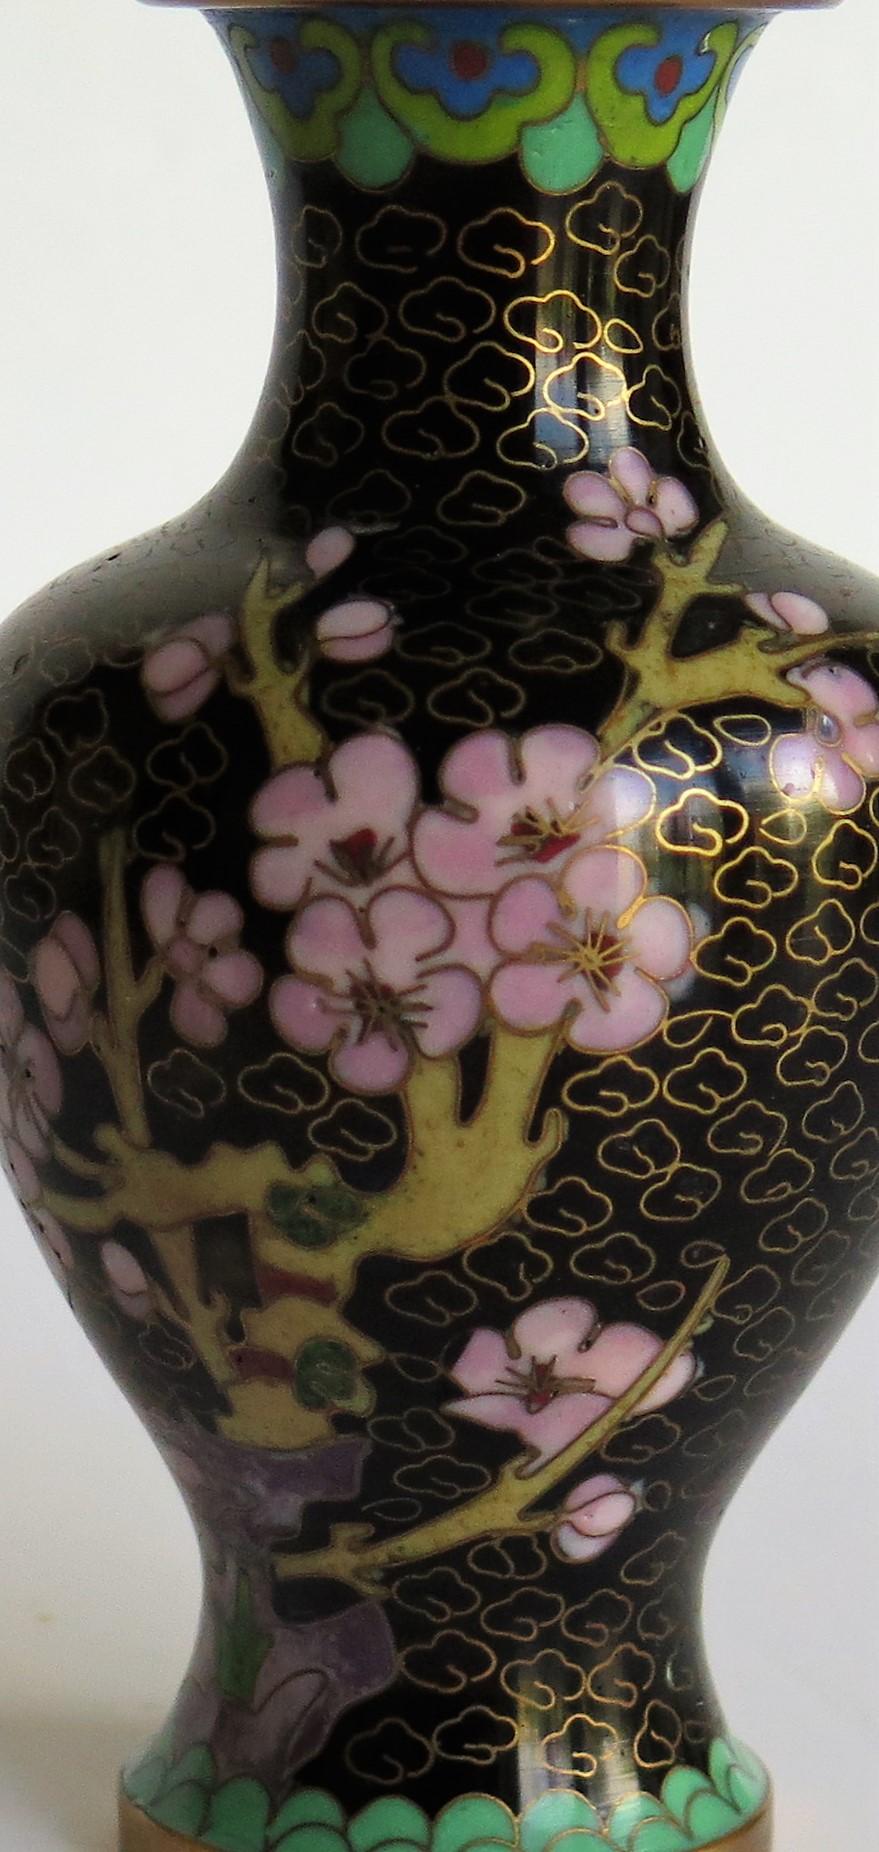 Ceramic Chinese Cloisonne Vase with Yellow Bird and Blossoms, circa 1940